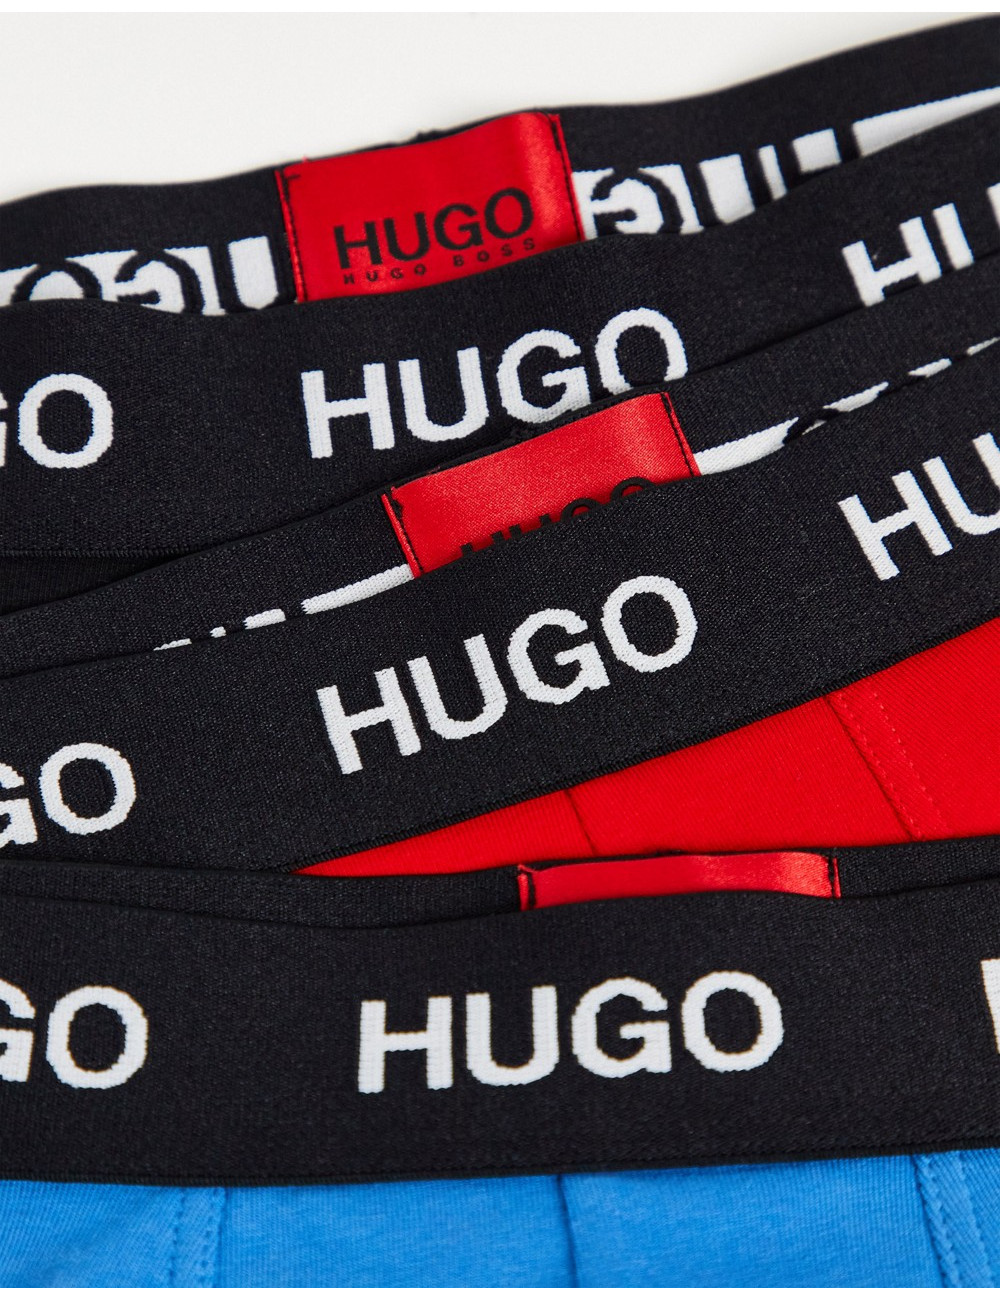 HUGO 3 pack trunks with all...